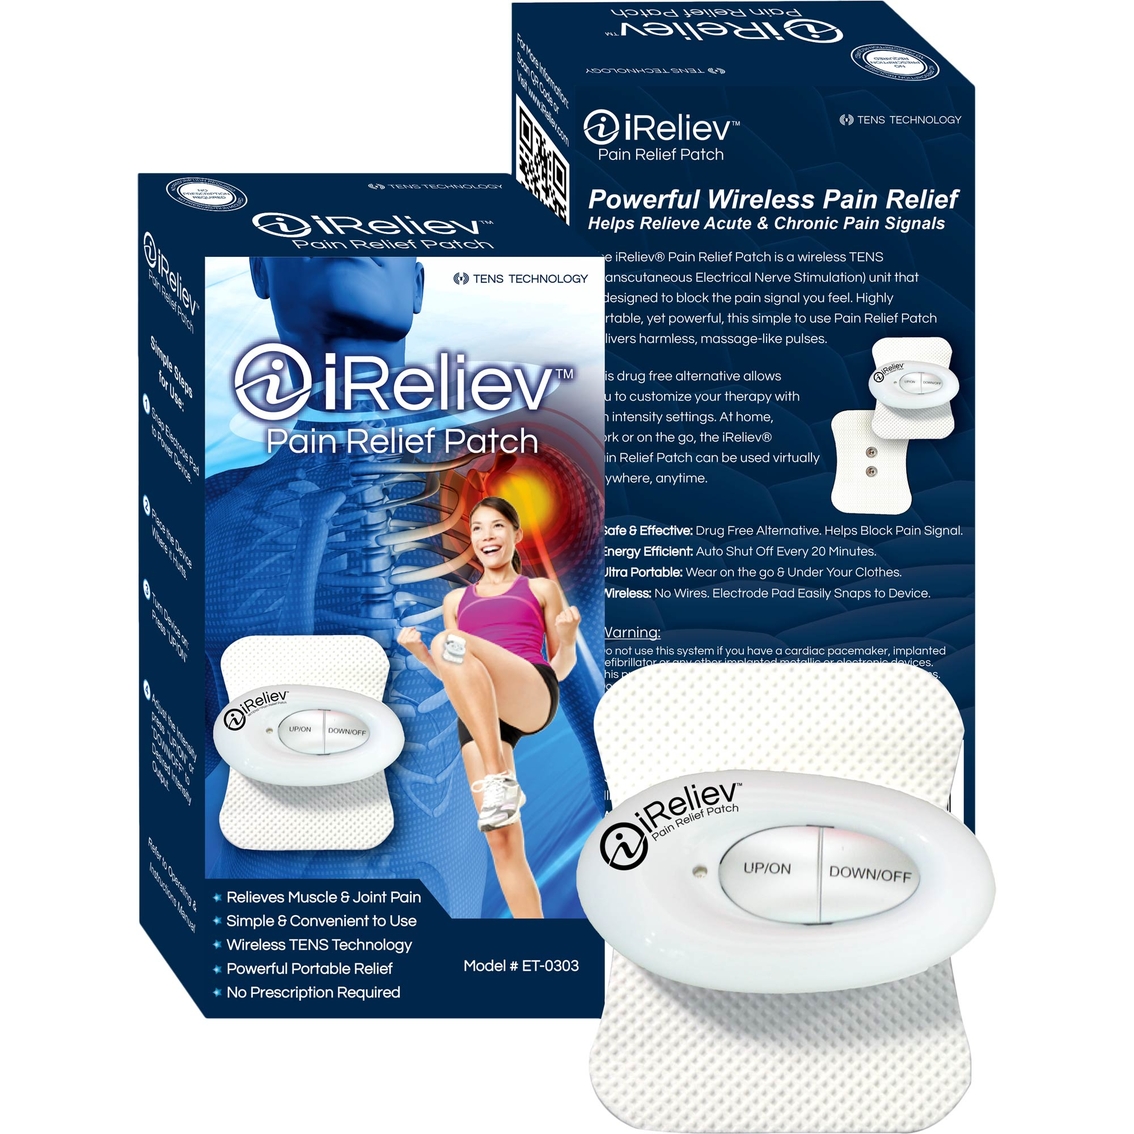 Ireliev Pain Relief Patch, Mini Wireless Tens Unit, Bedroom Safety, Beauty & Health